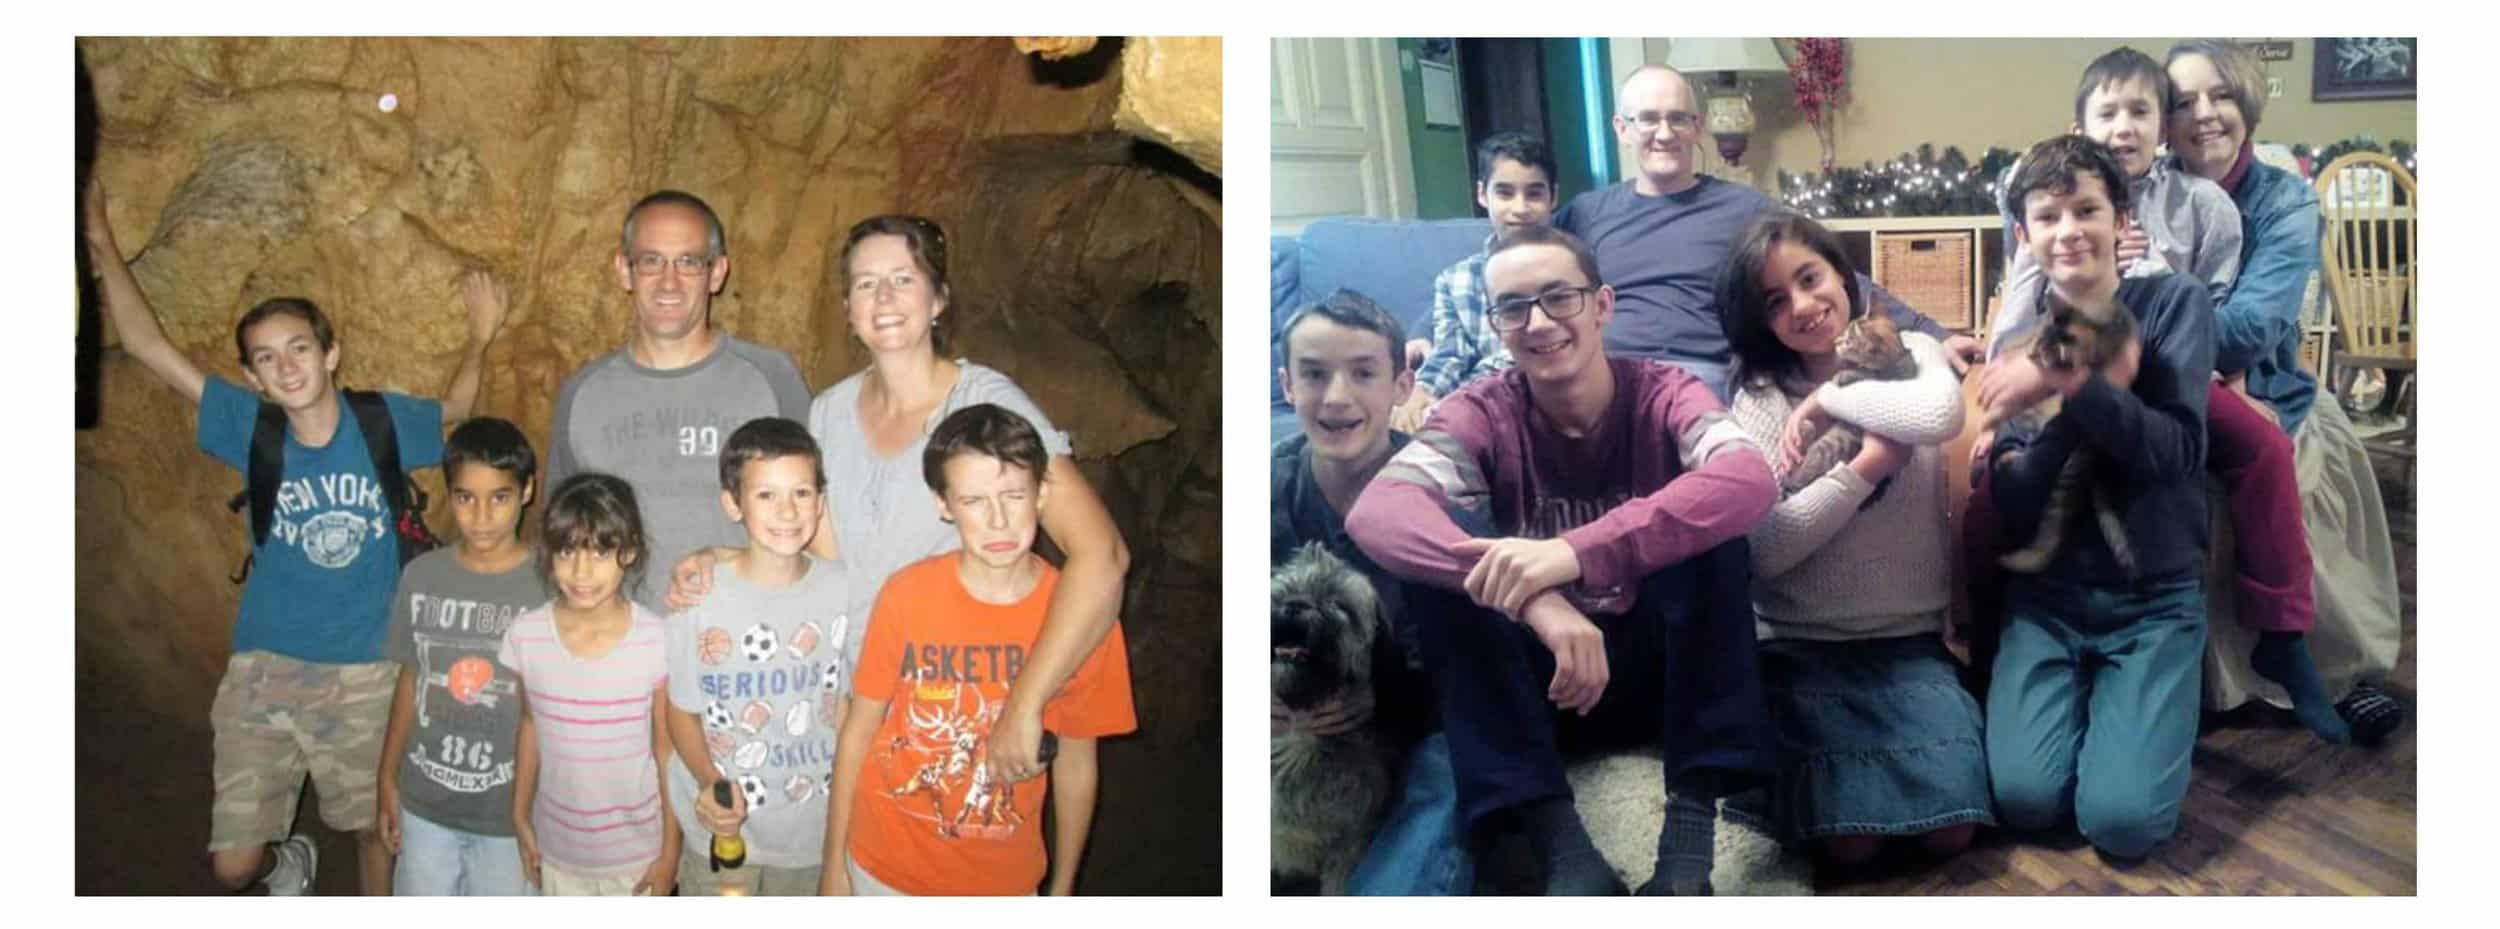 Howerton and his family: Left-five years ago; Right-Christmas 2015